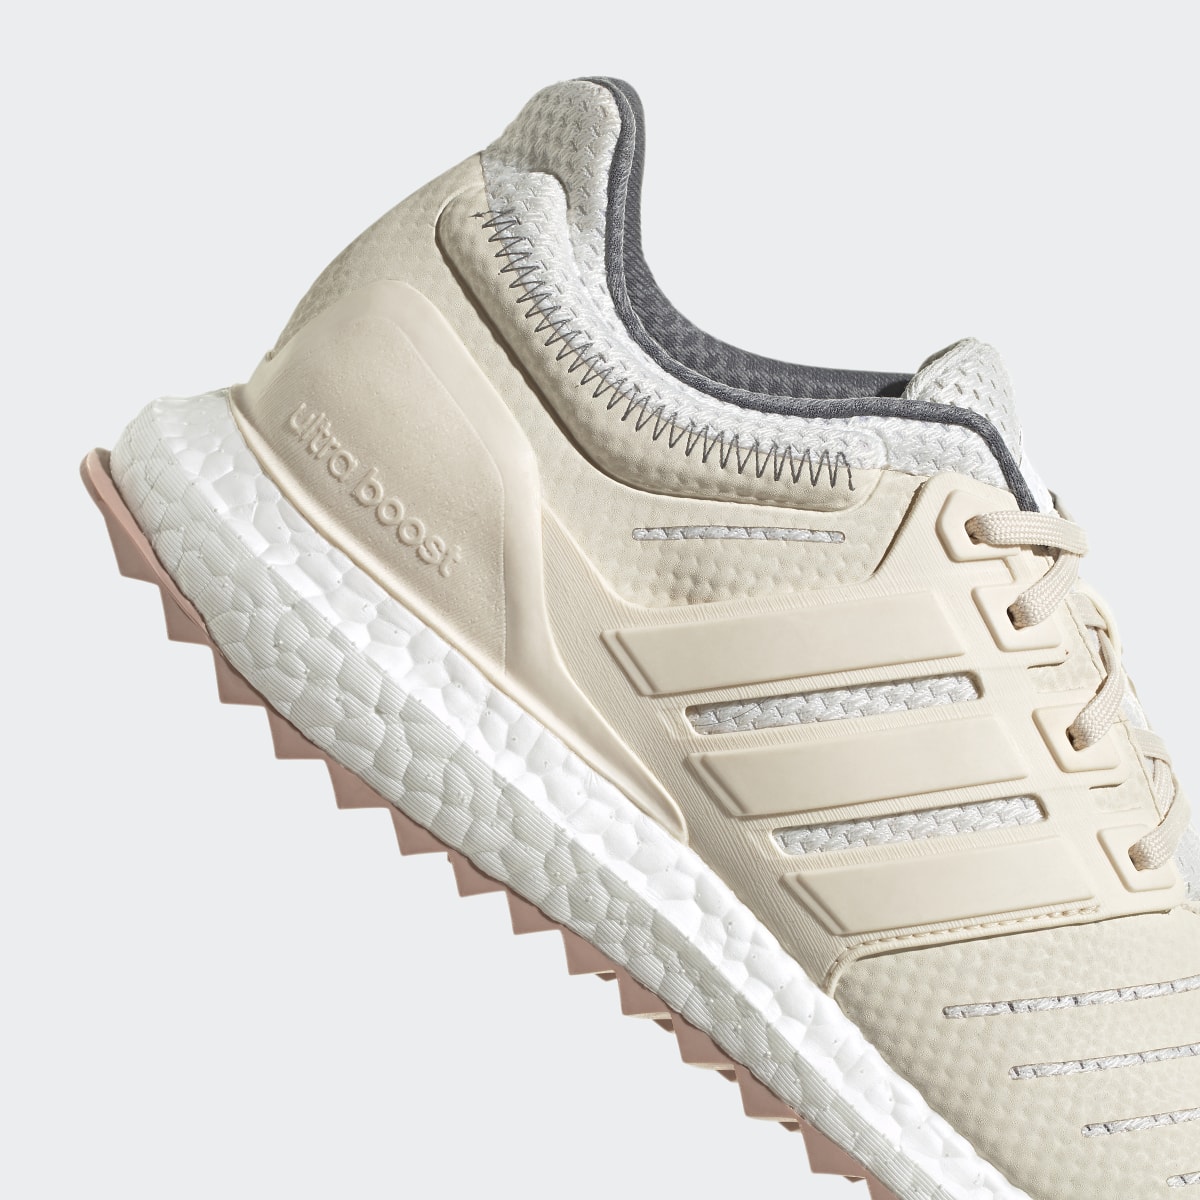 Adidas Ultraboost DNA XXII Lifestyle Running Sportswear Capsule Collection Shoes. 9